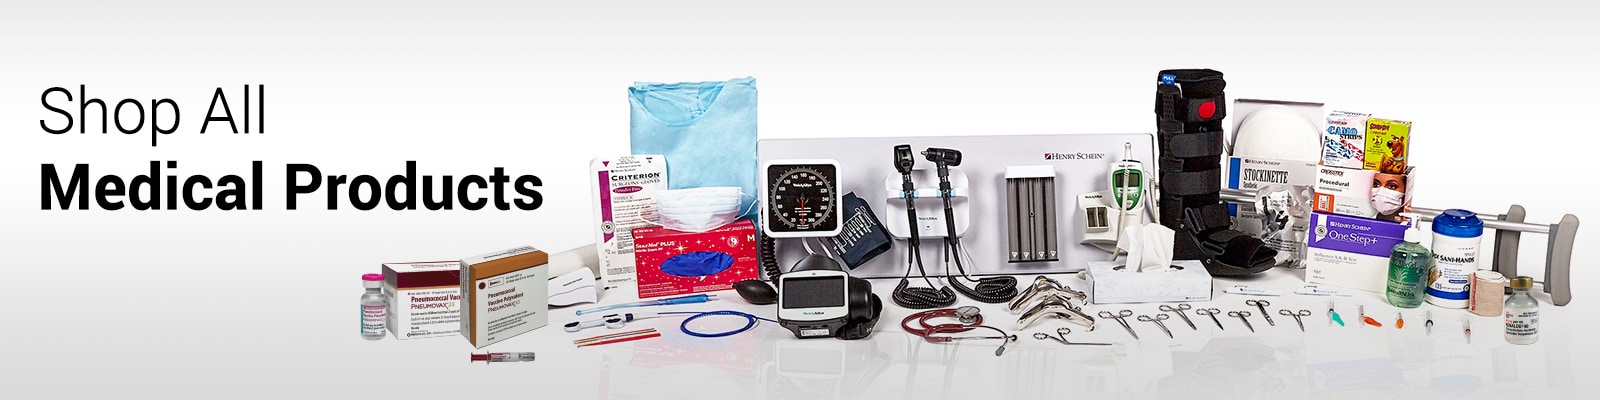 medical supplies, equipment, and products